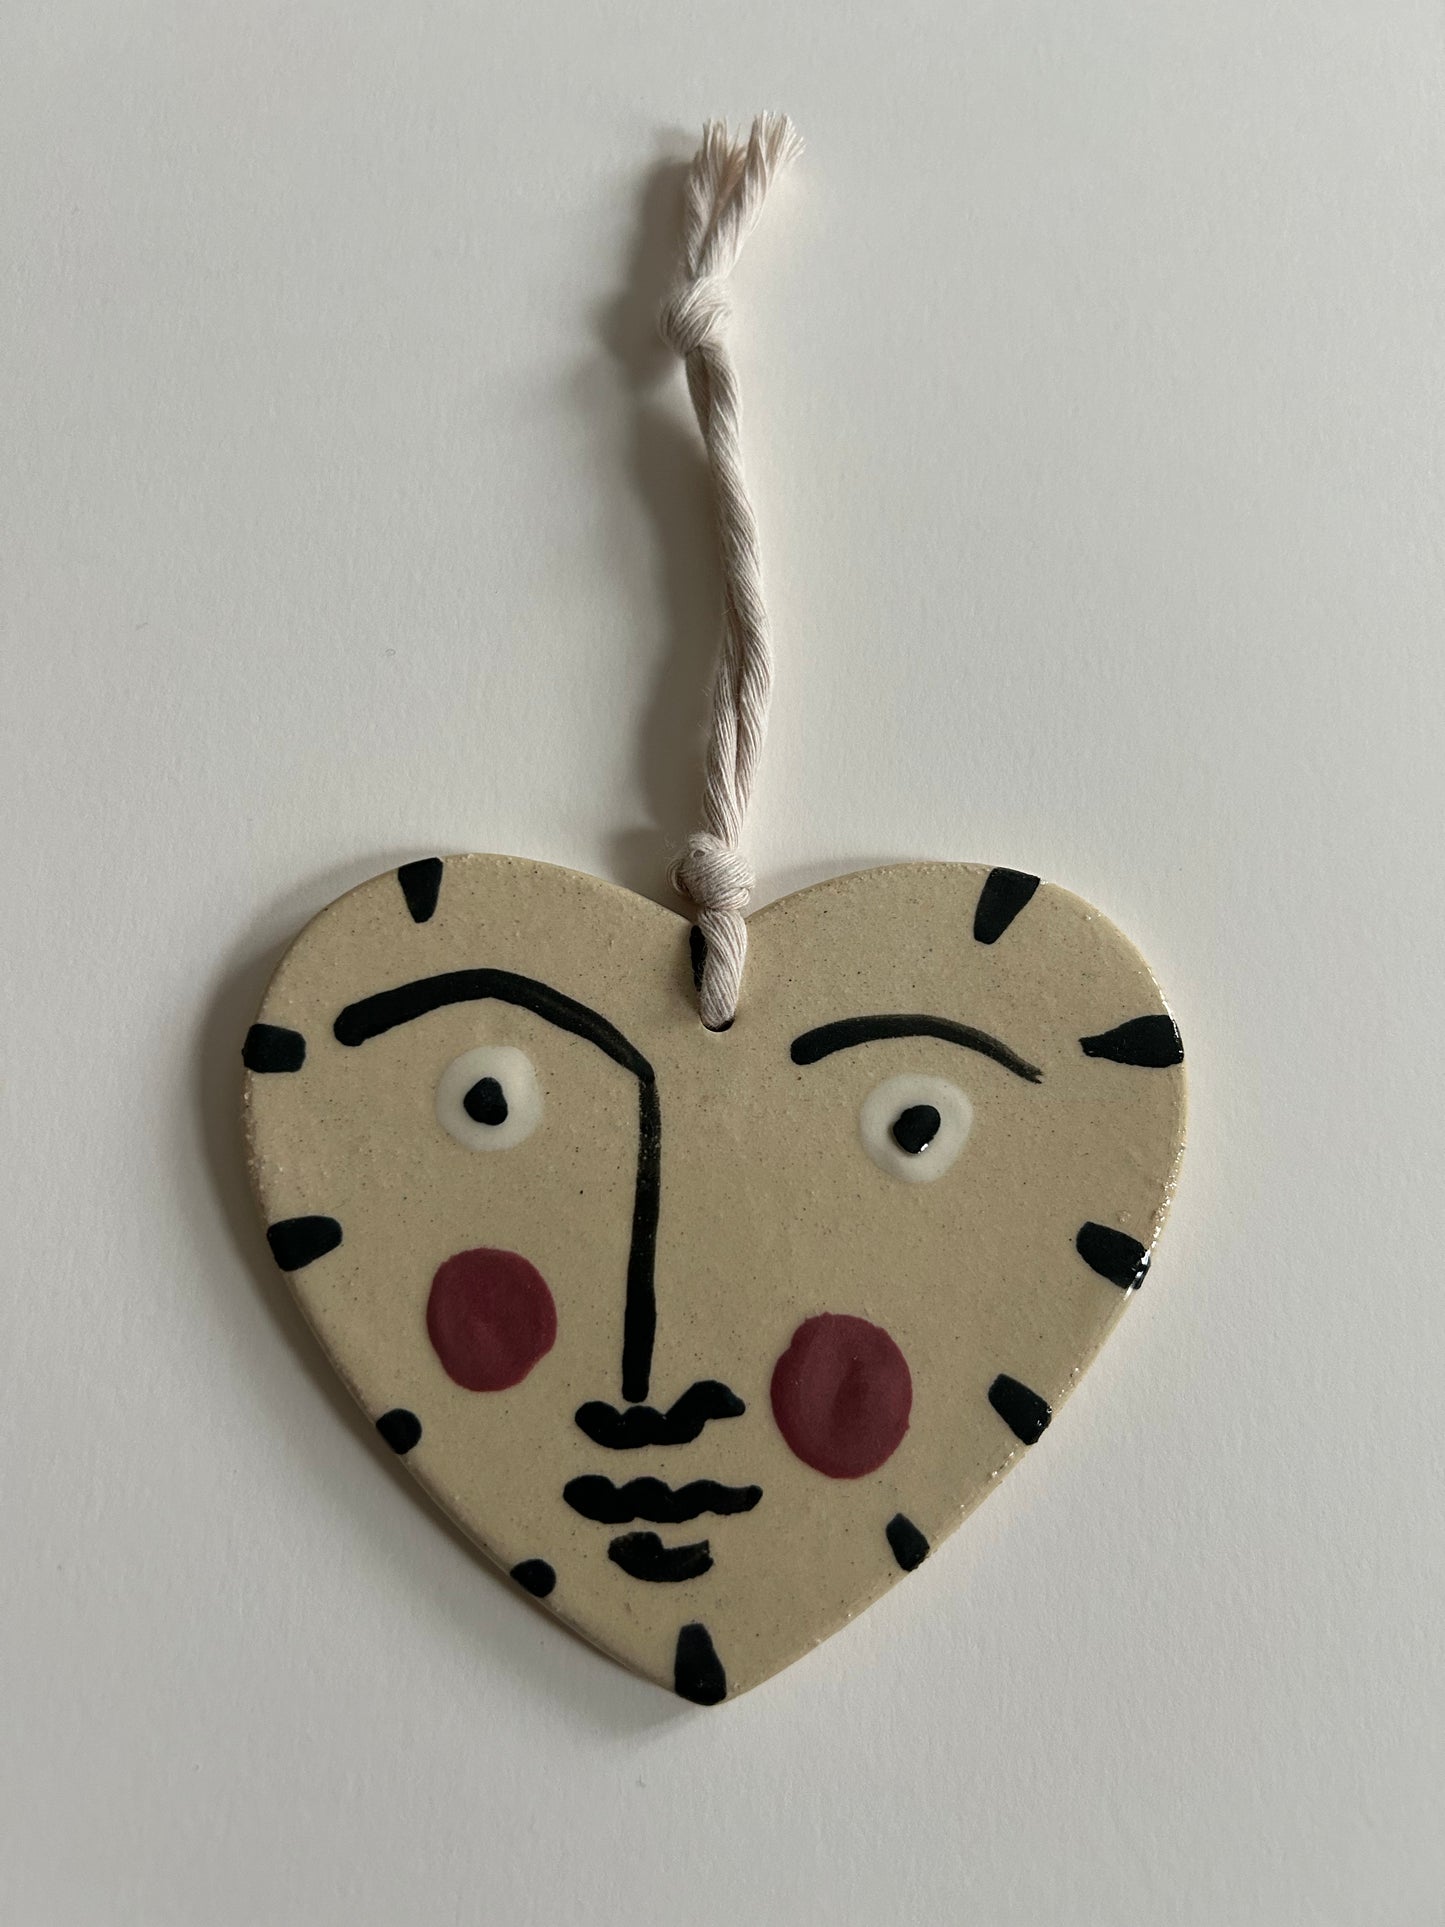 Isolation Face Heart Hanging Decoration Large White Pink Cheeks